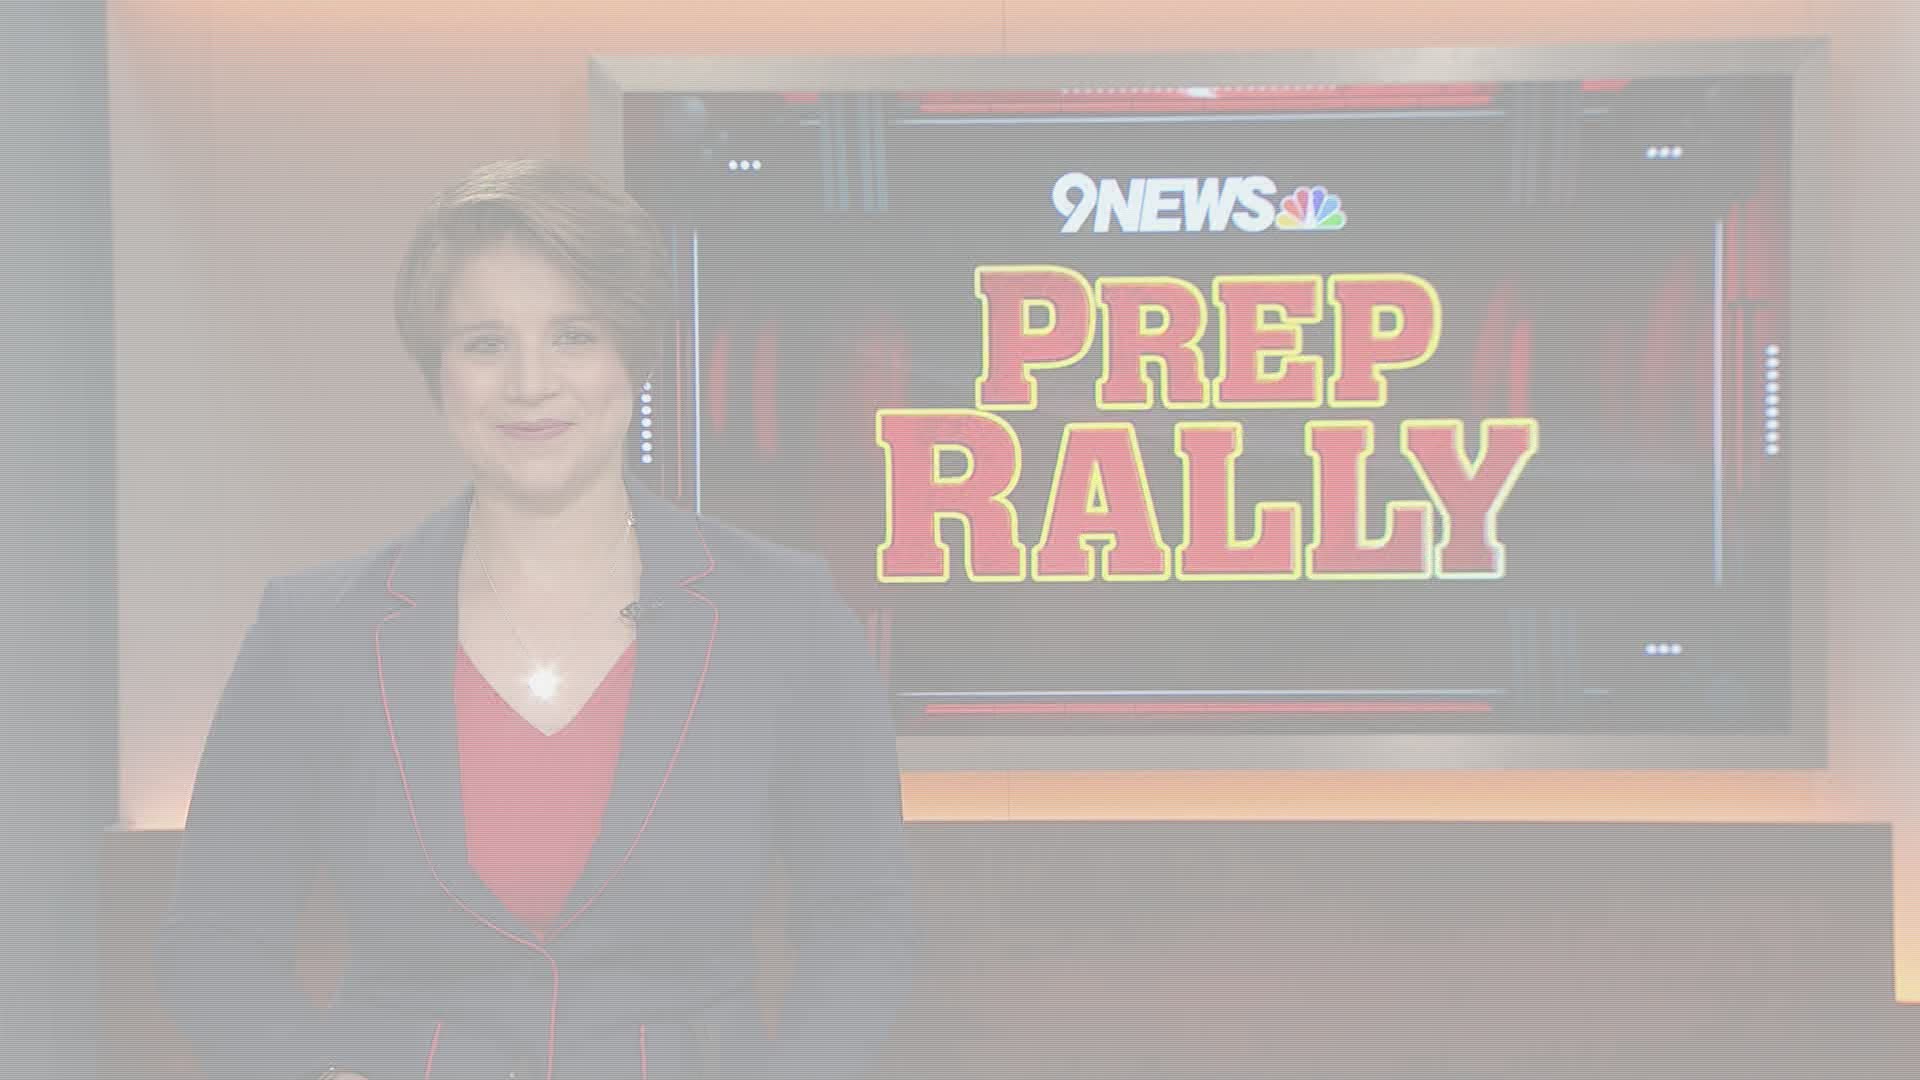 Catch up on the latest high school sports action with Saturday morning's Prep Rally shows.